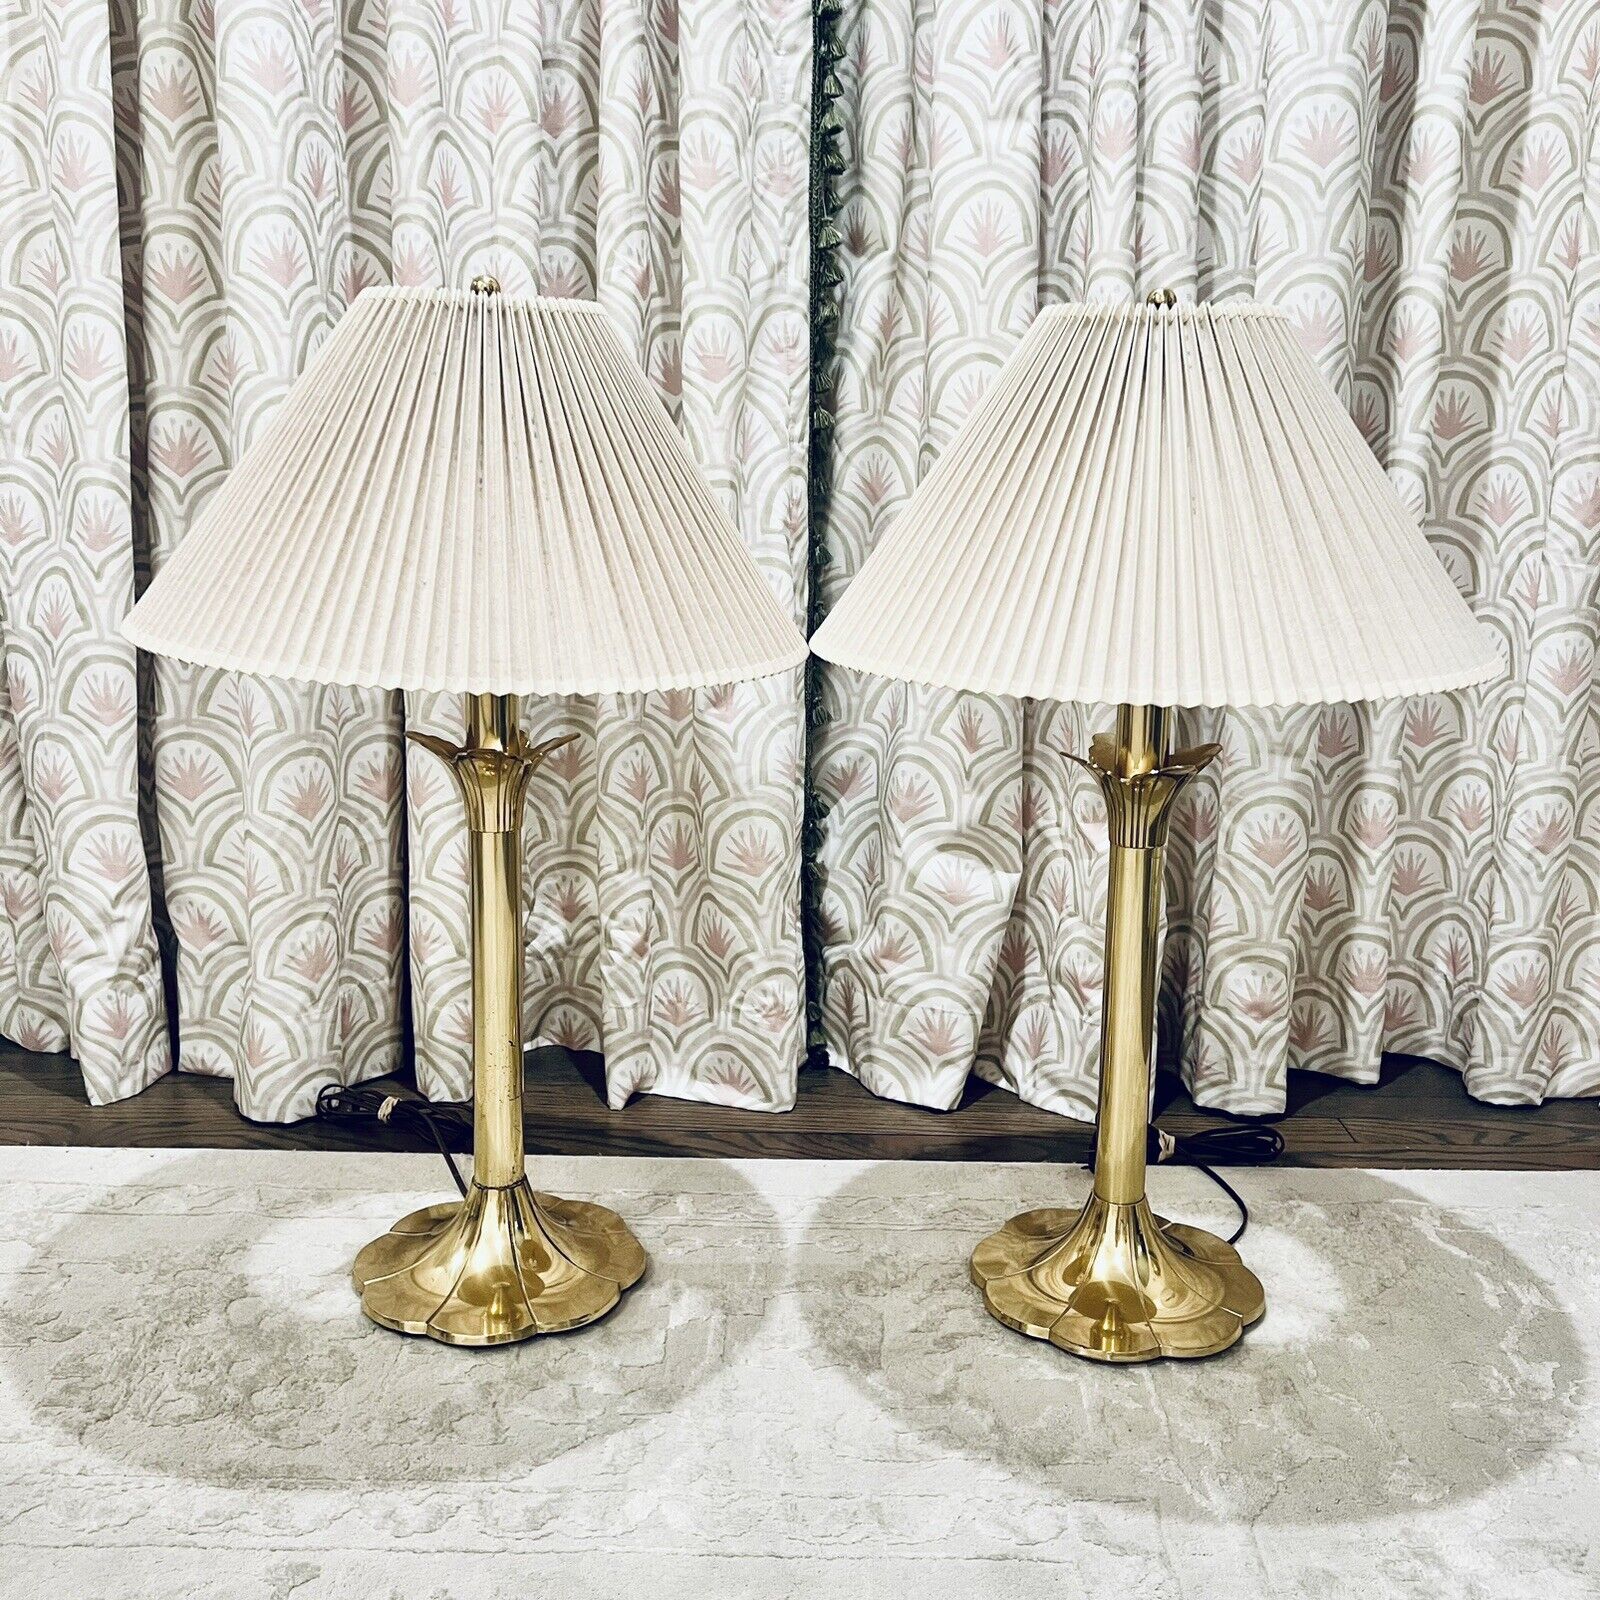 Stiffel Brass Tulip Table Lamps Pair Set Of 2 #6163 With Original Shades Vtg MCM